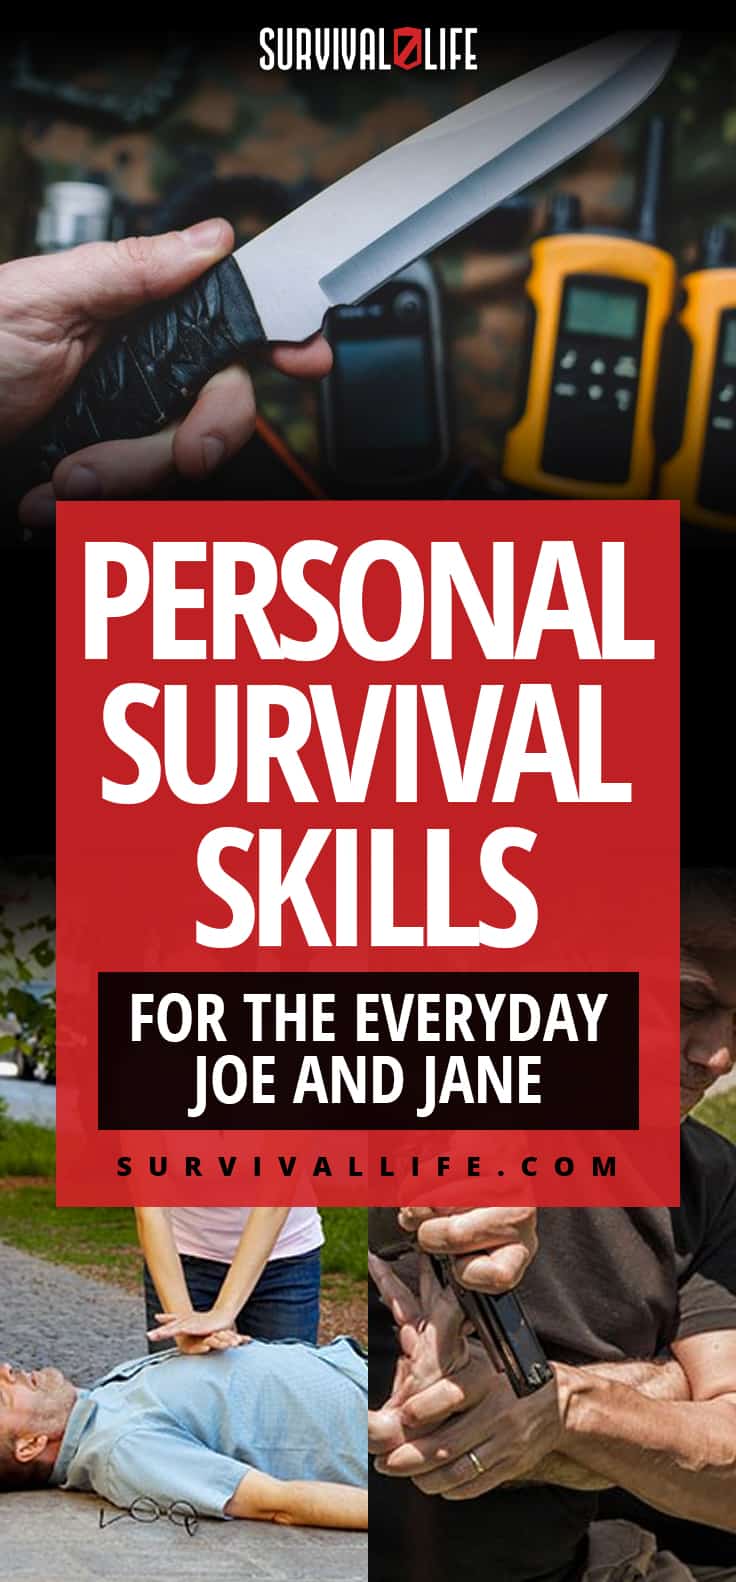 Personal Survival Skills For The Everyday Joe And Jane